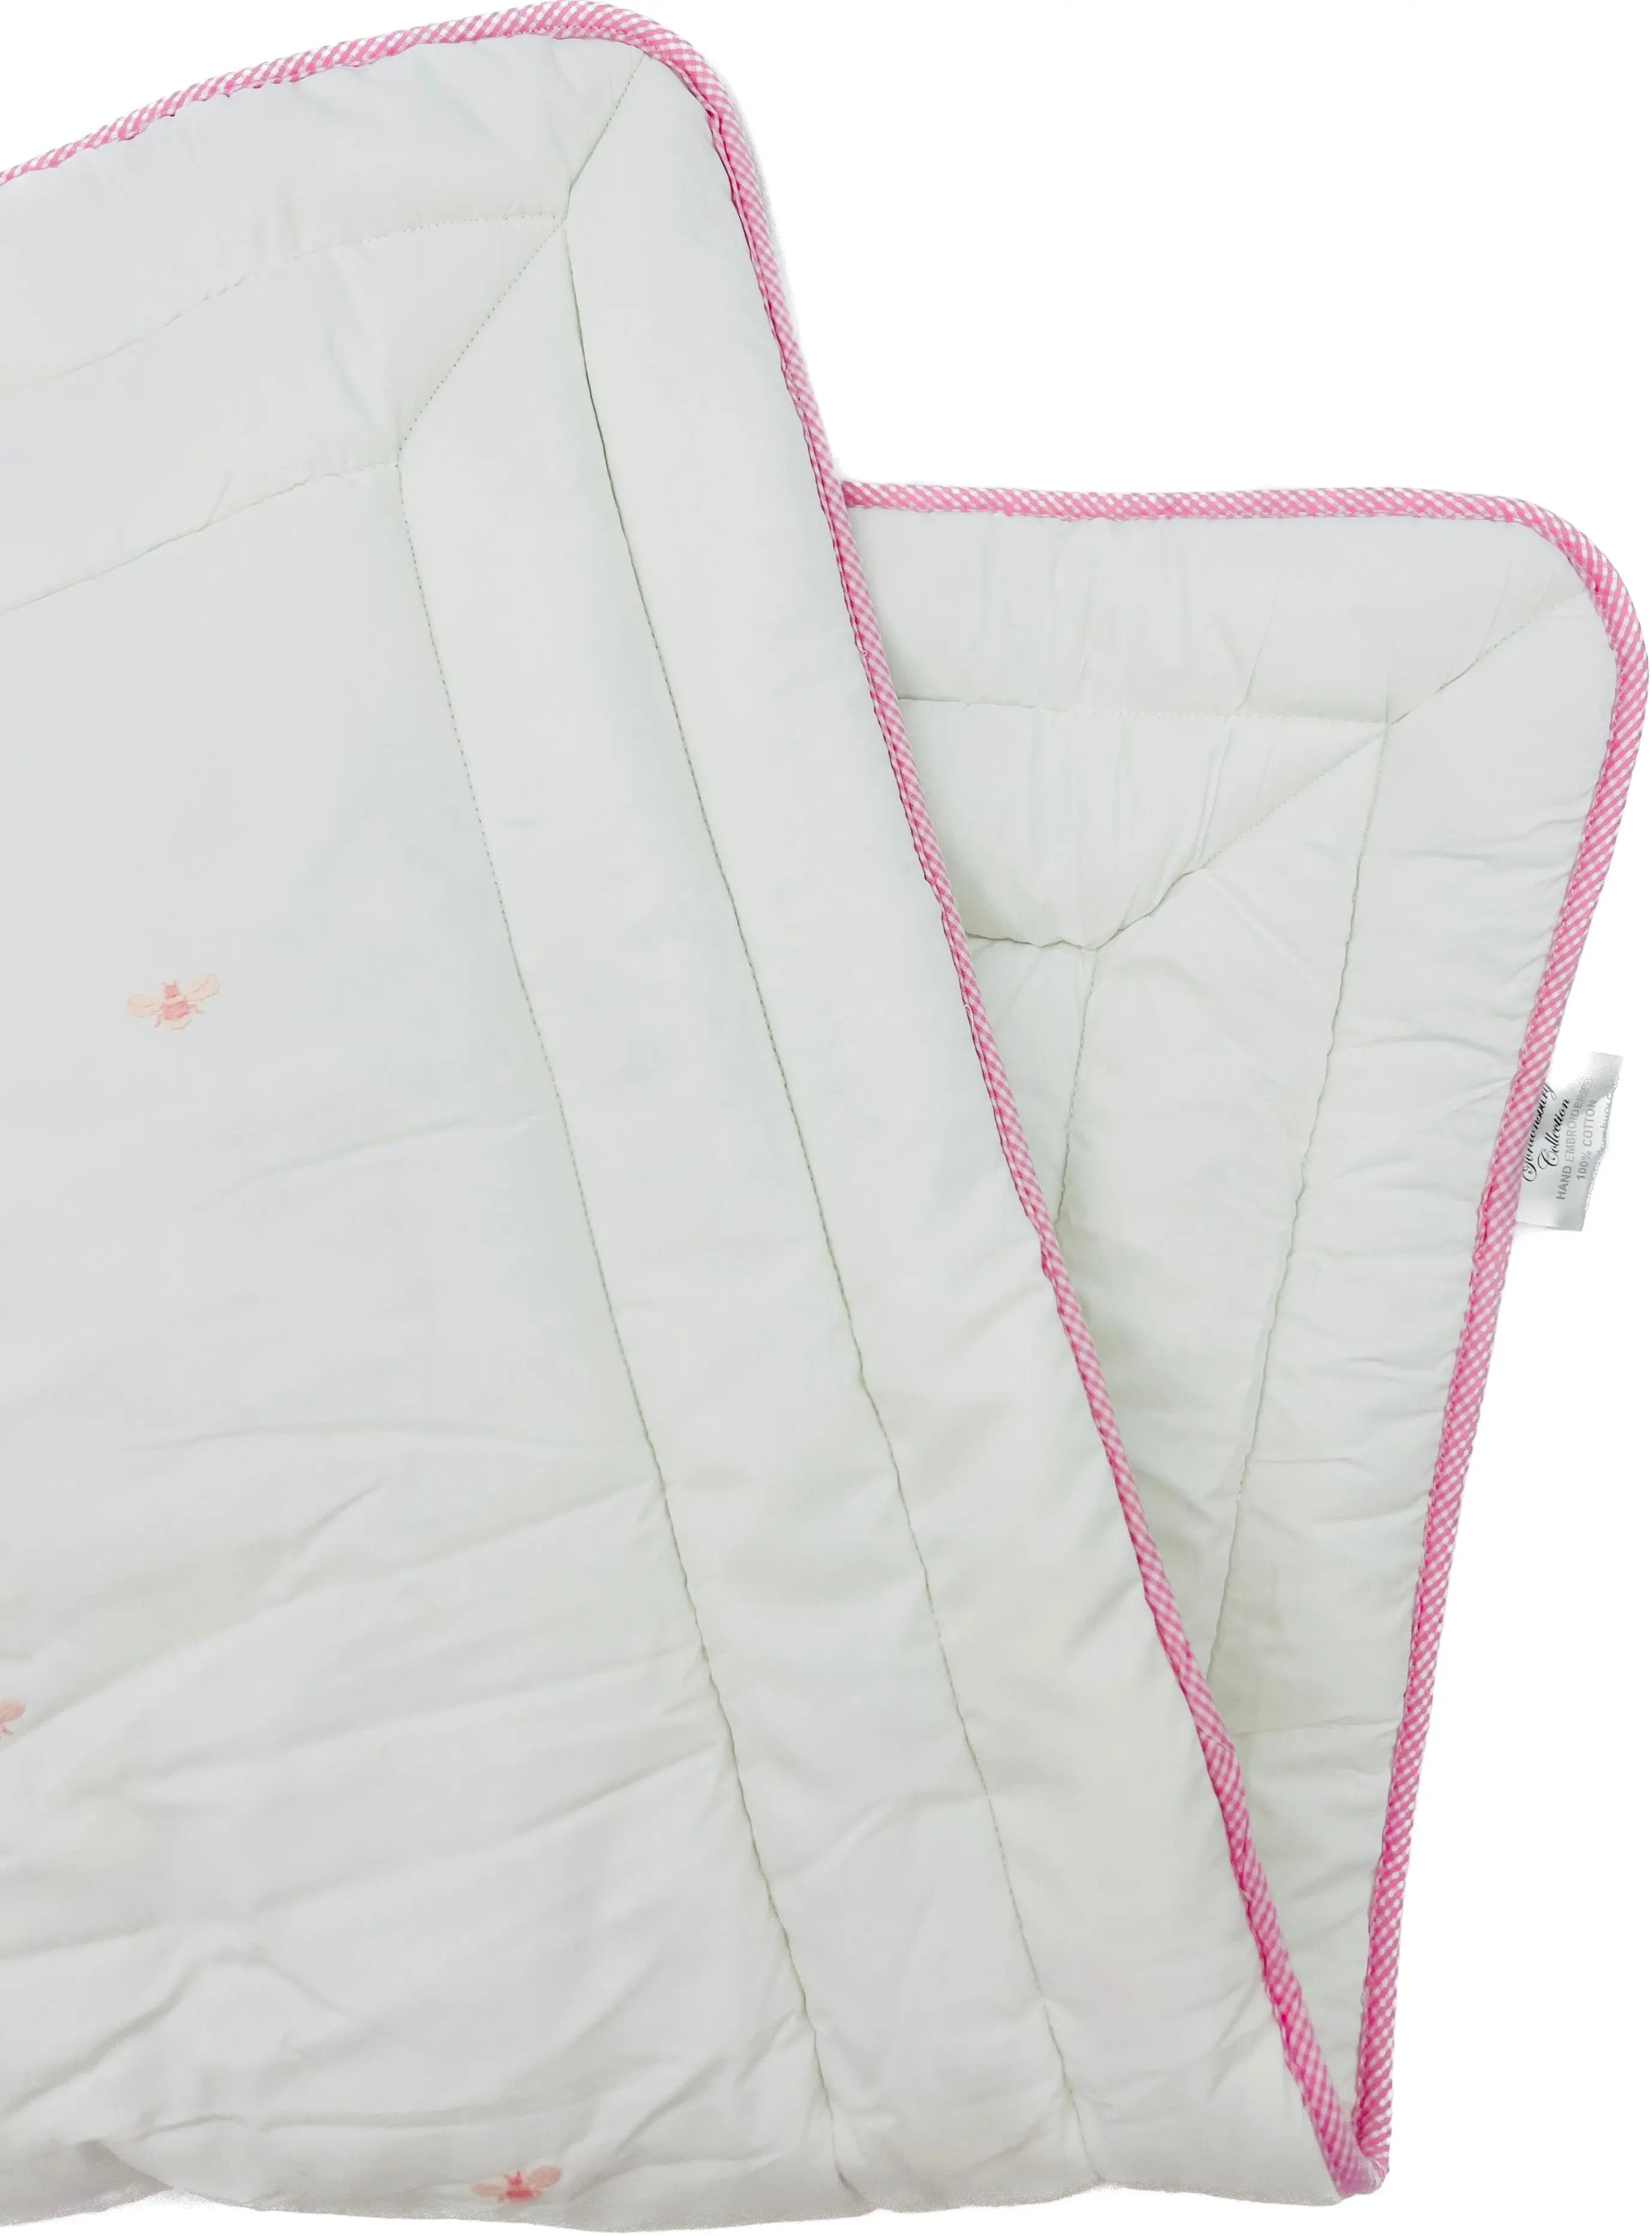 Cotbed quilt "baby bees" pink-Bumpers & quilts-Gordonsbury-Blue Almonds-London-South Kensington